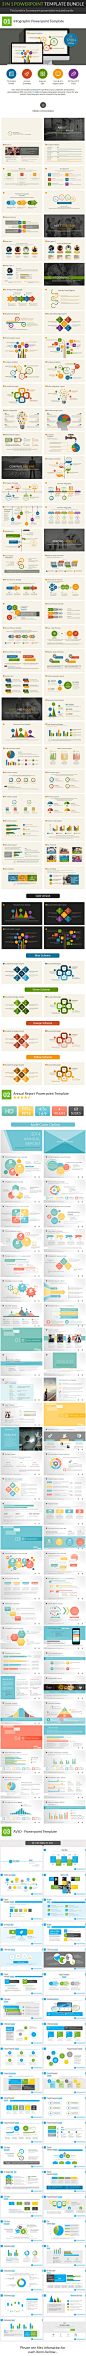 3 In 1 Powerpoint Templates Bundle - Business PowerPoint Templates